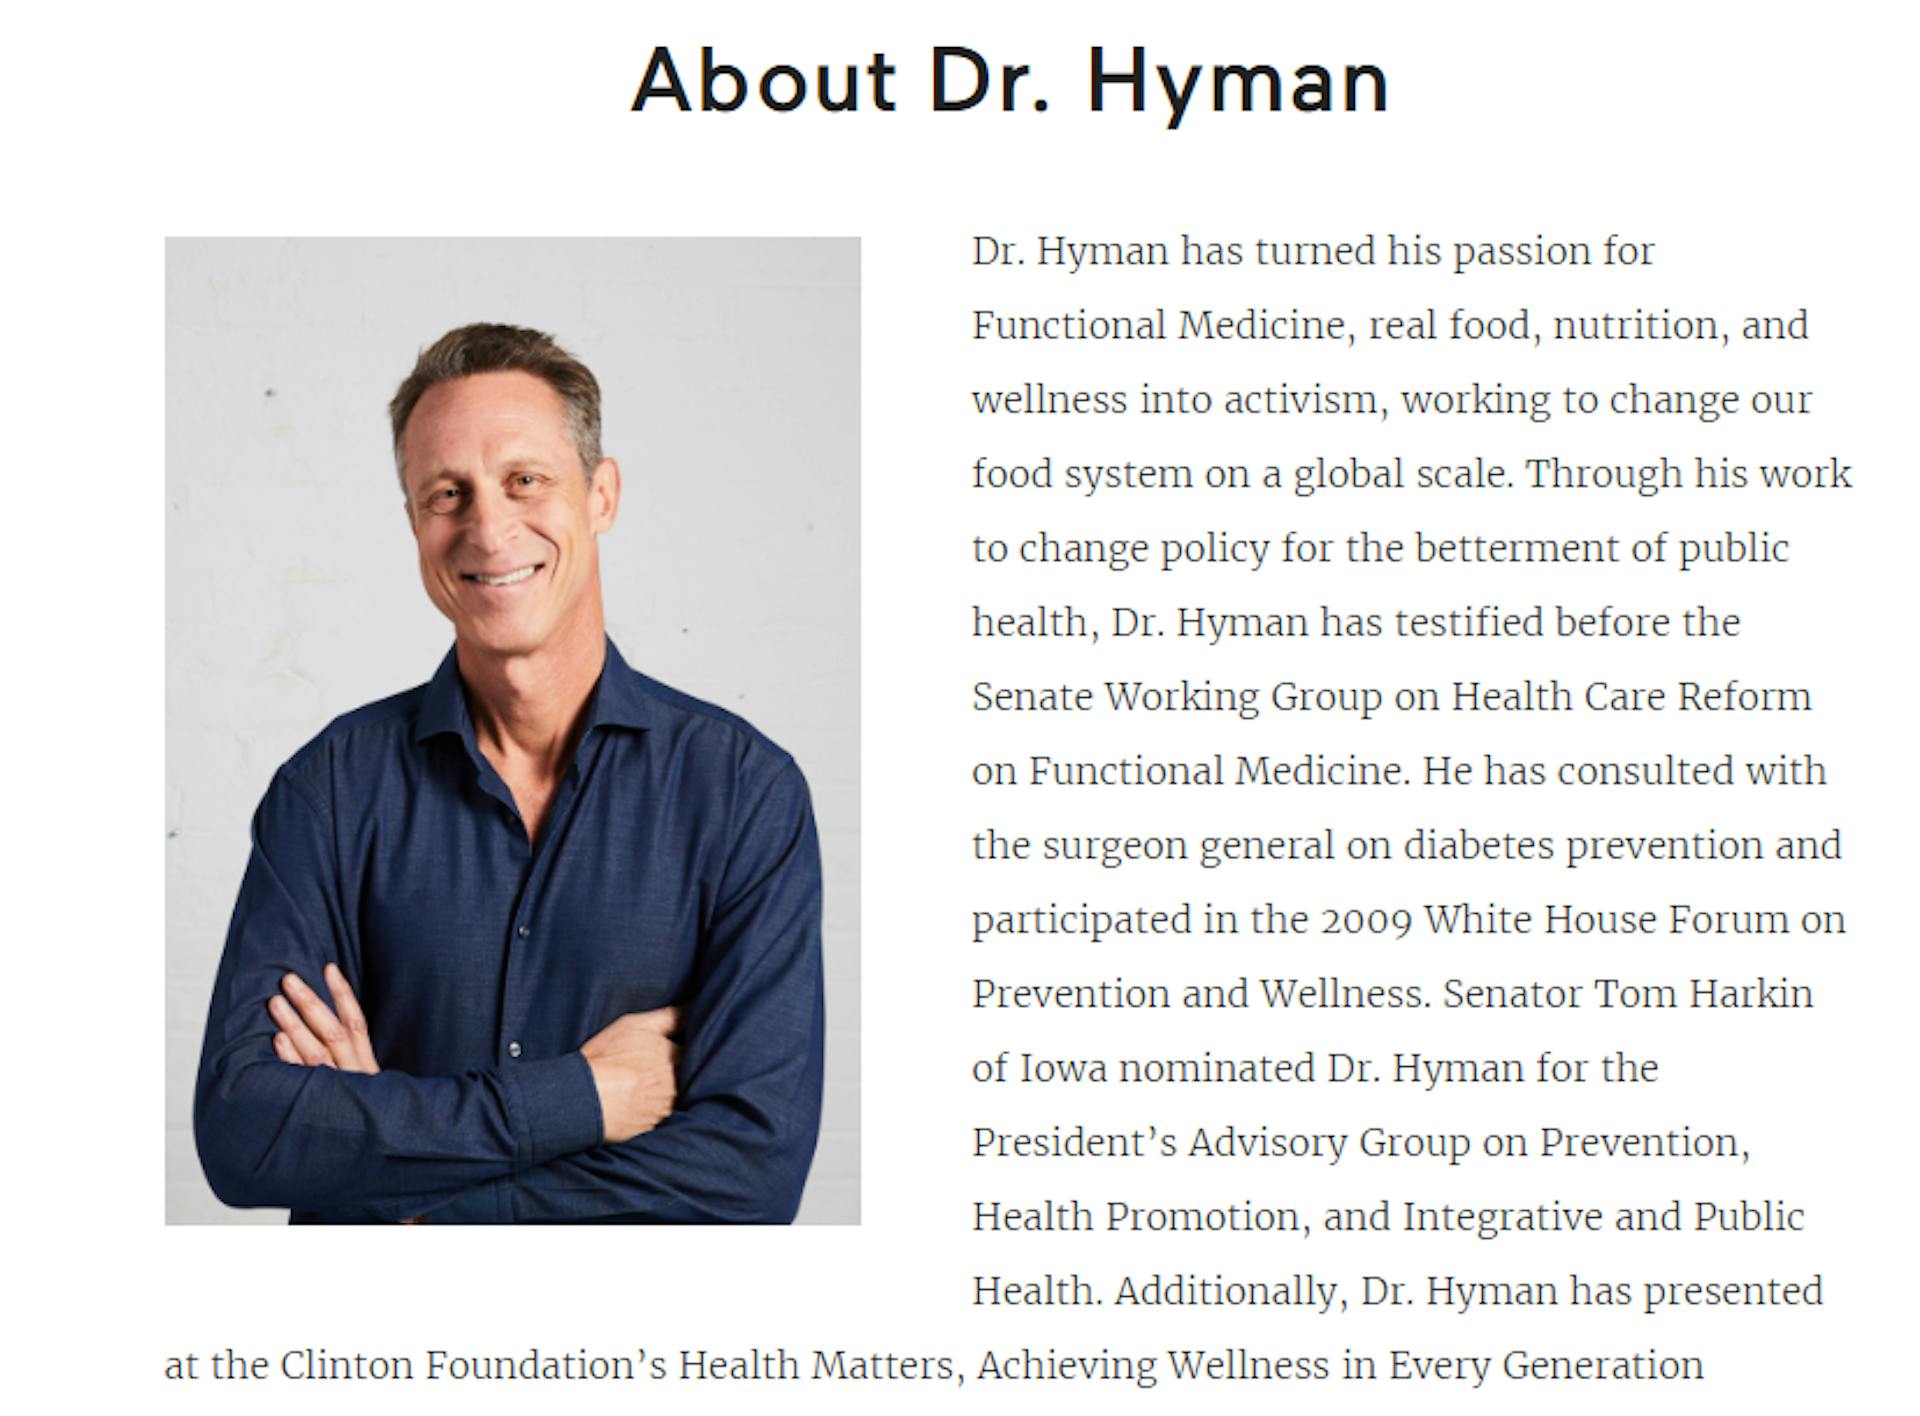 Mark Hyman's 'About Me' page 